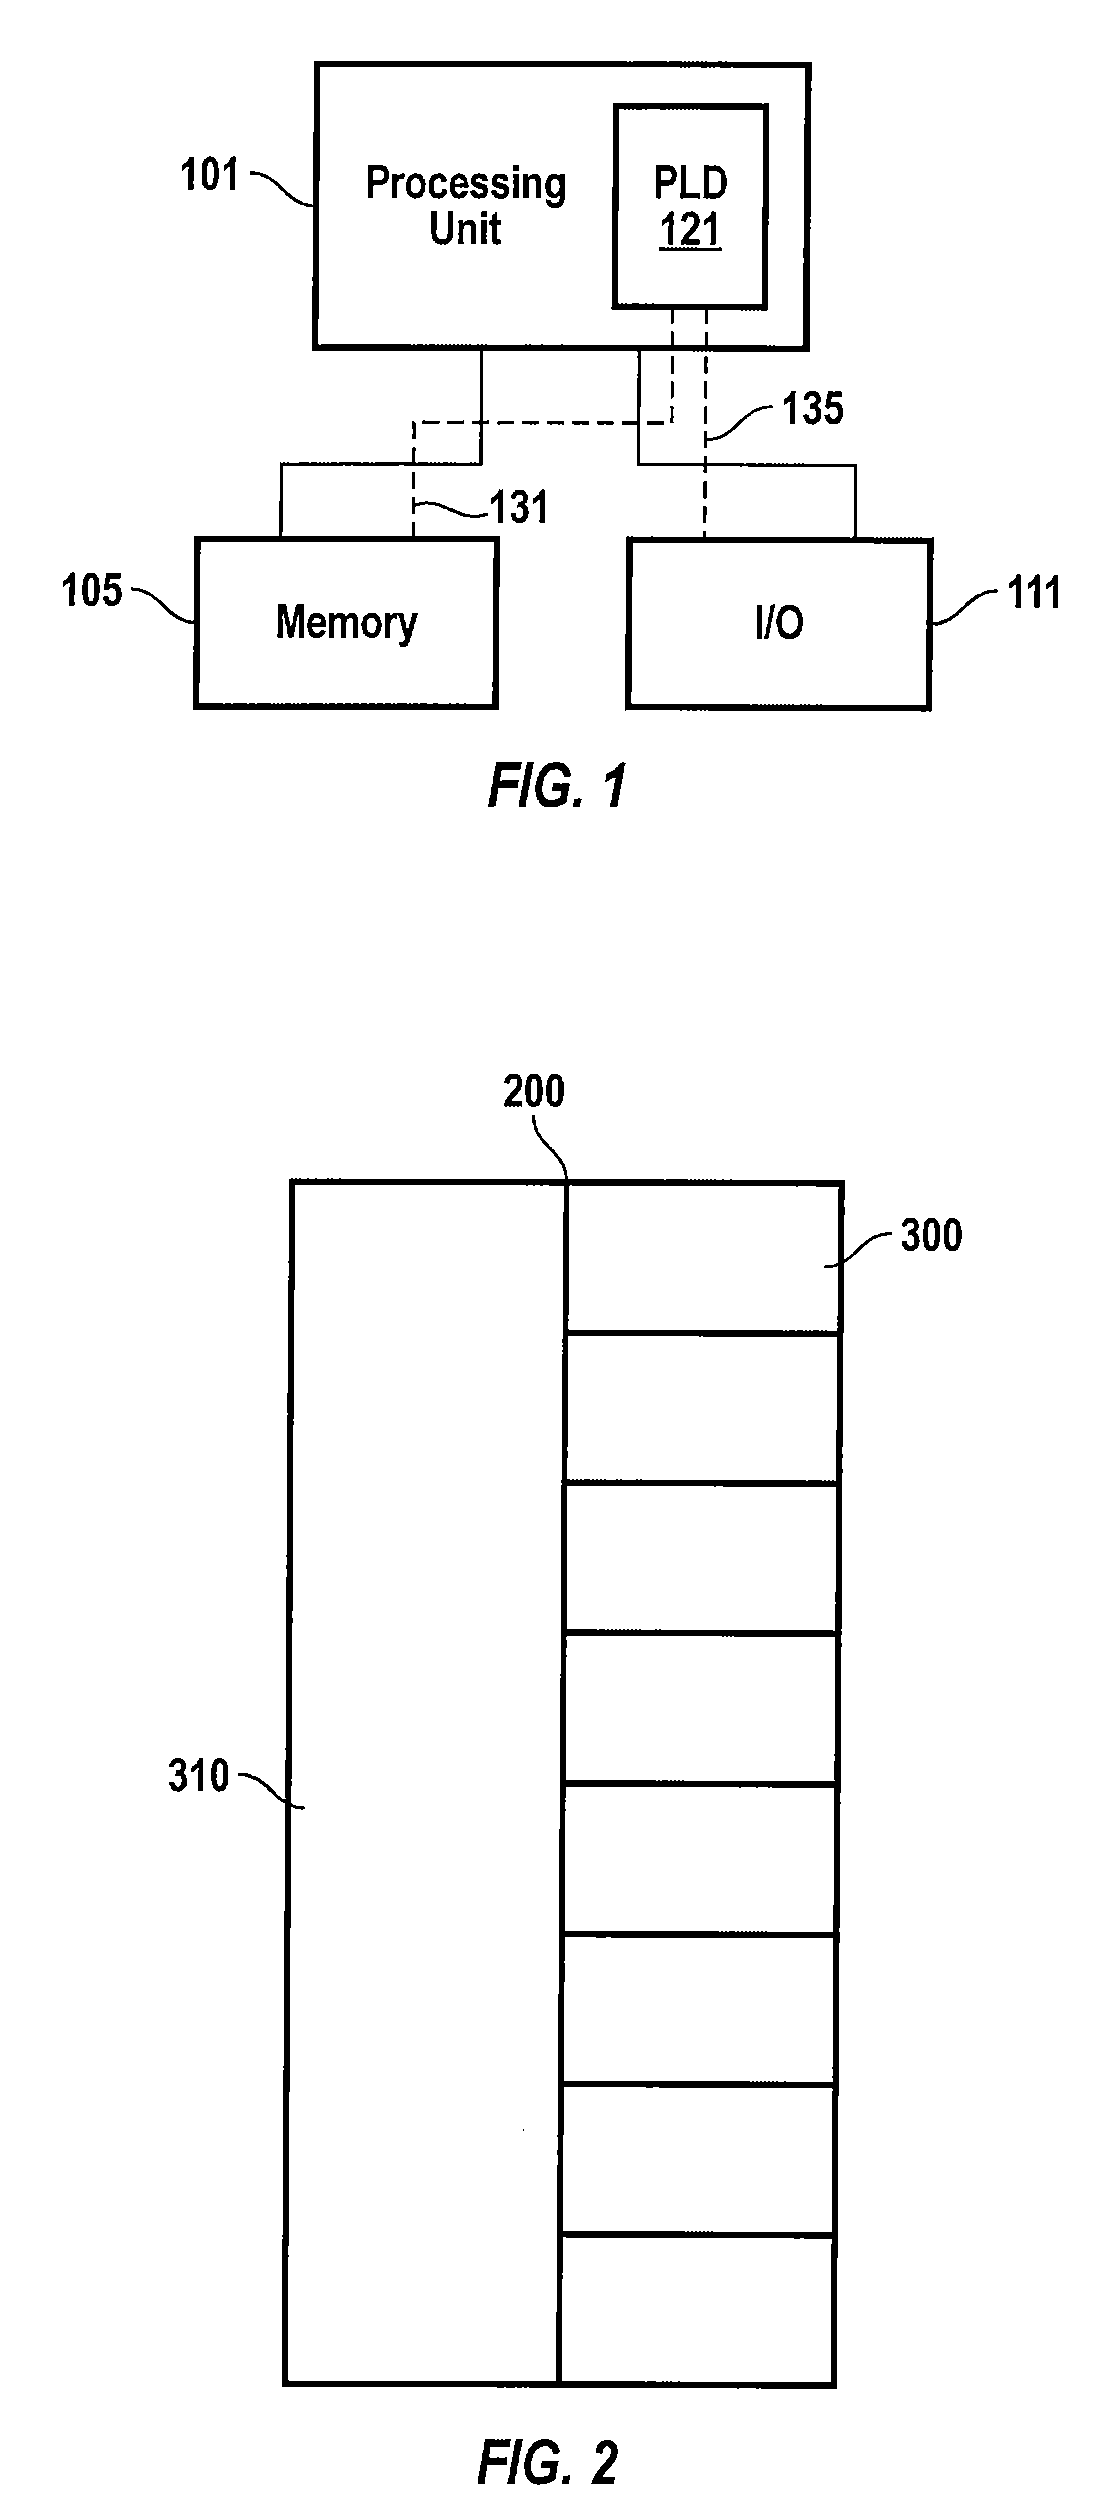 Automatic test configuration generation facilitating repair of programmable circuits